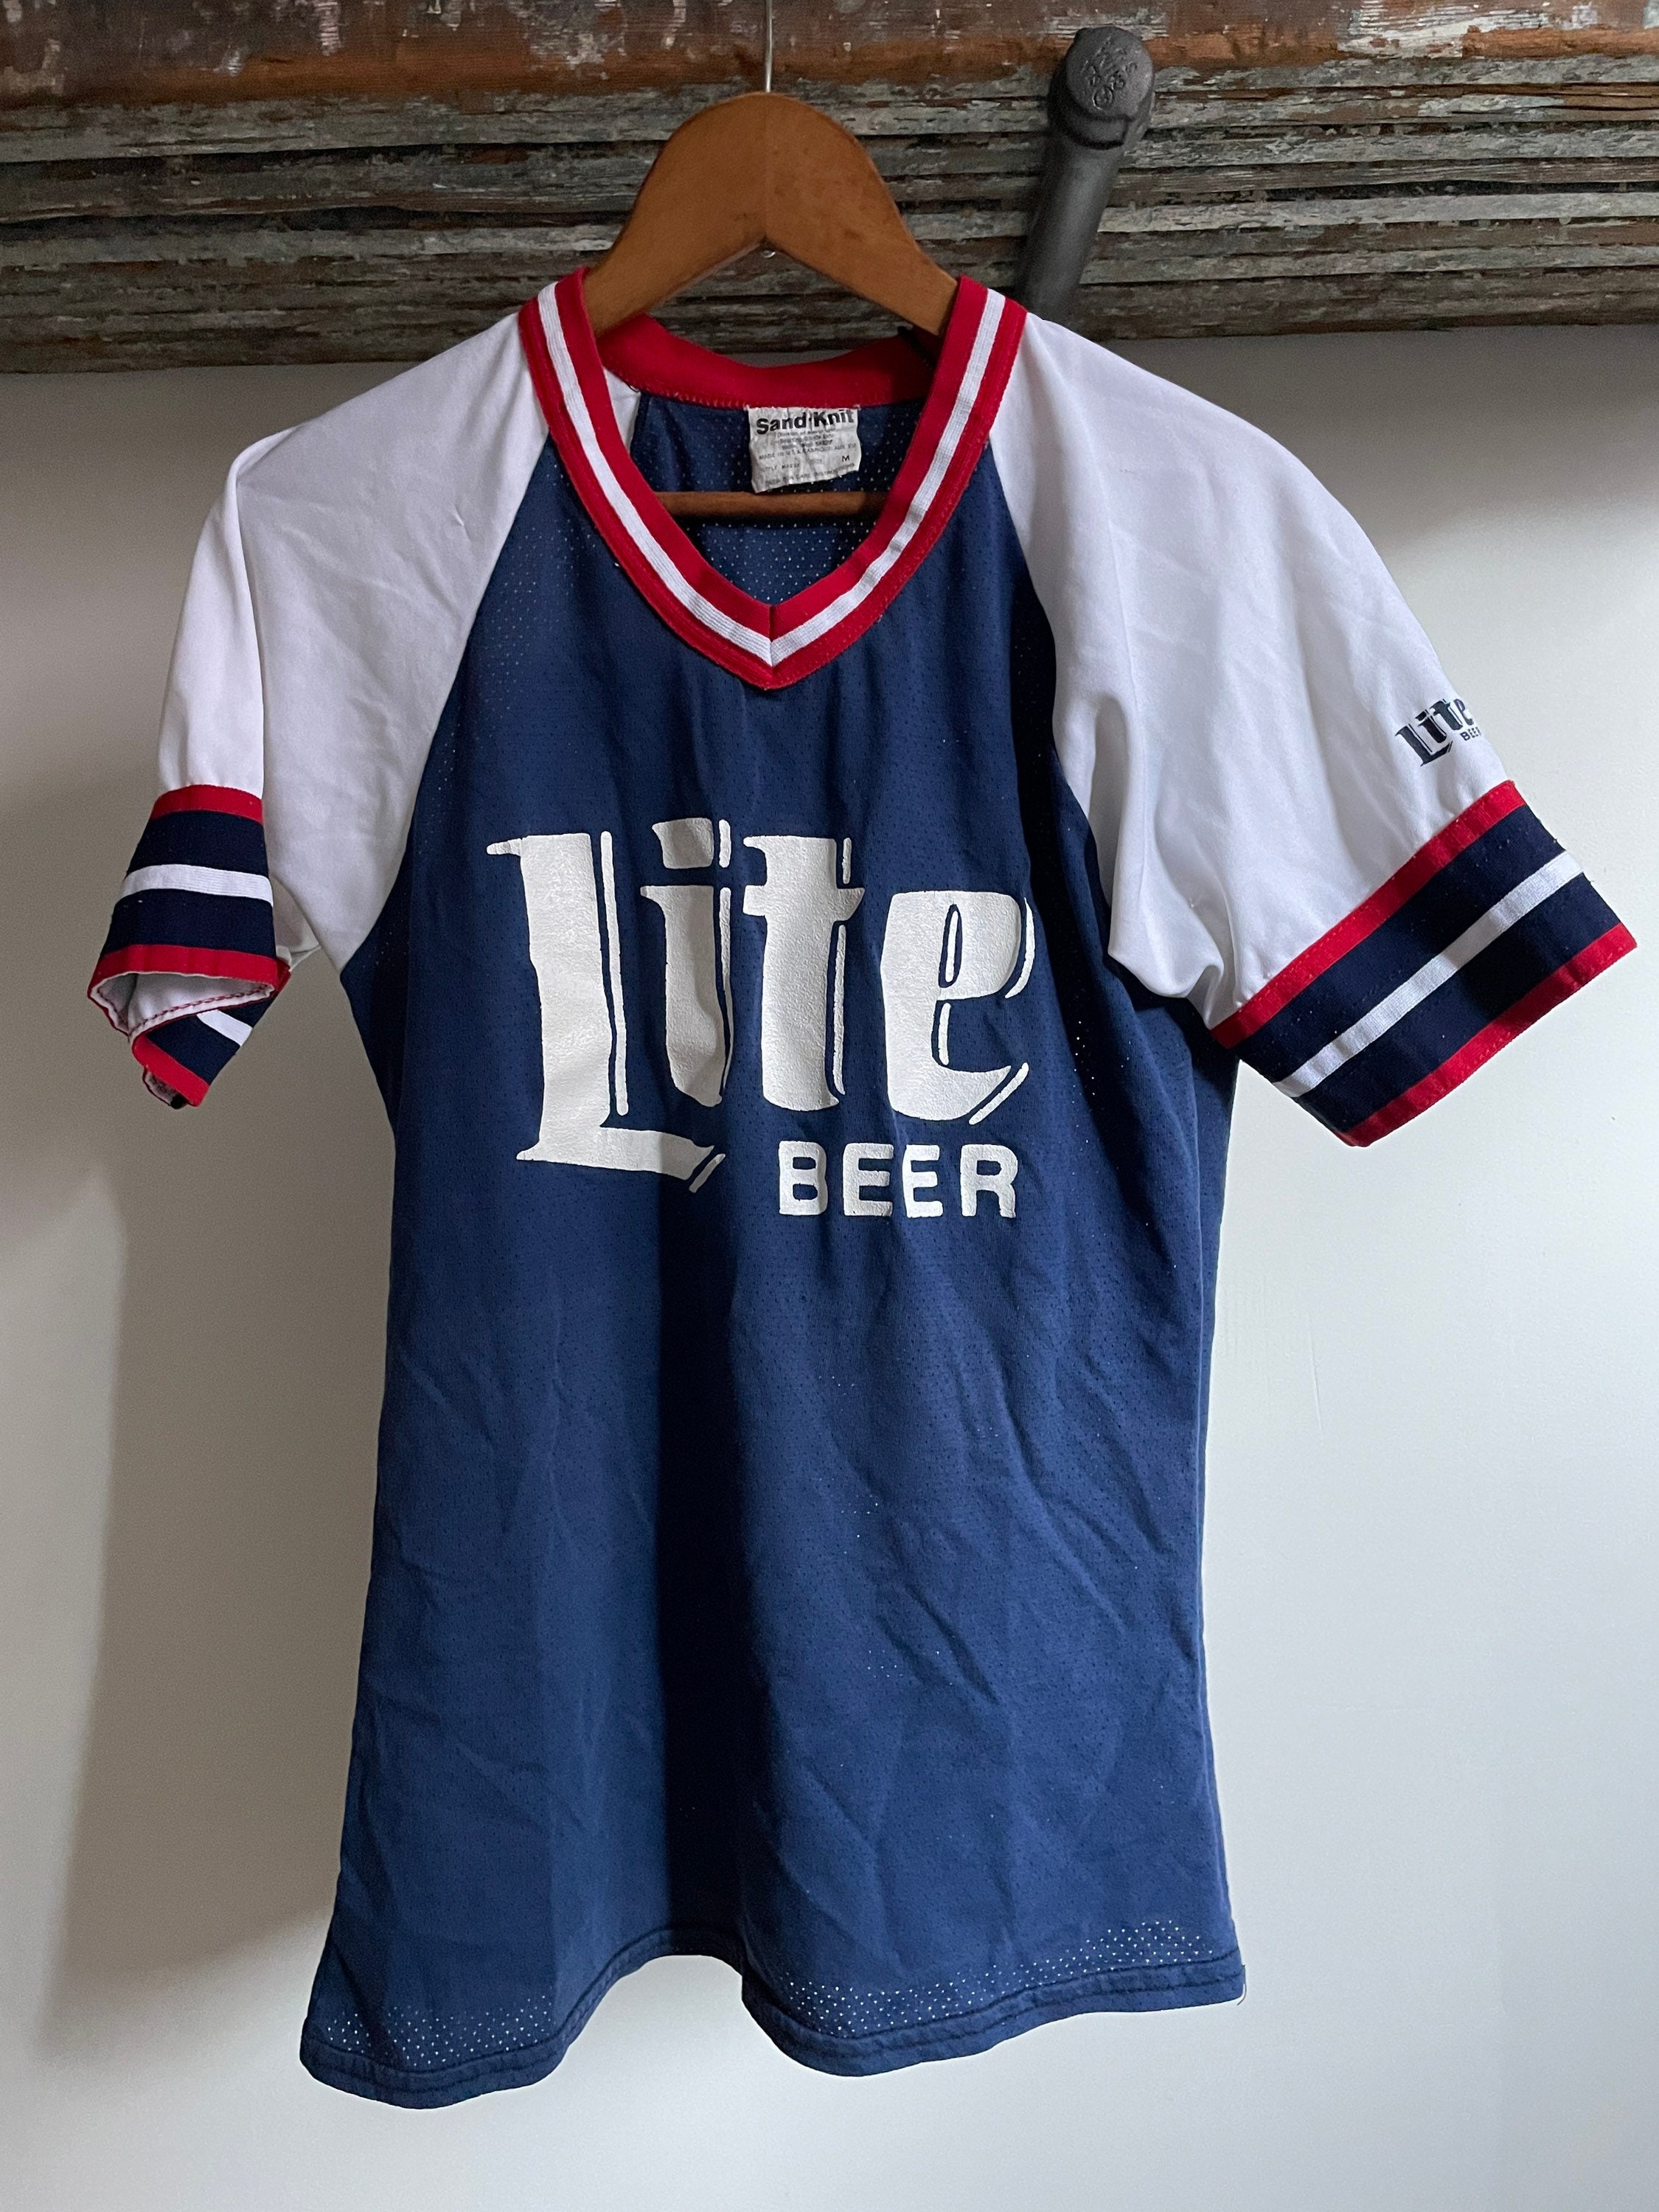 Here For Beer - Softball - Buy In